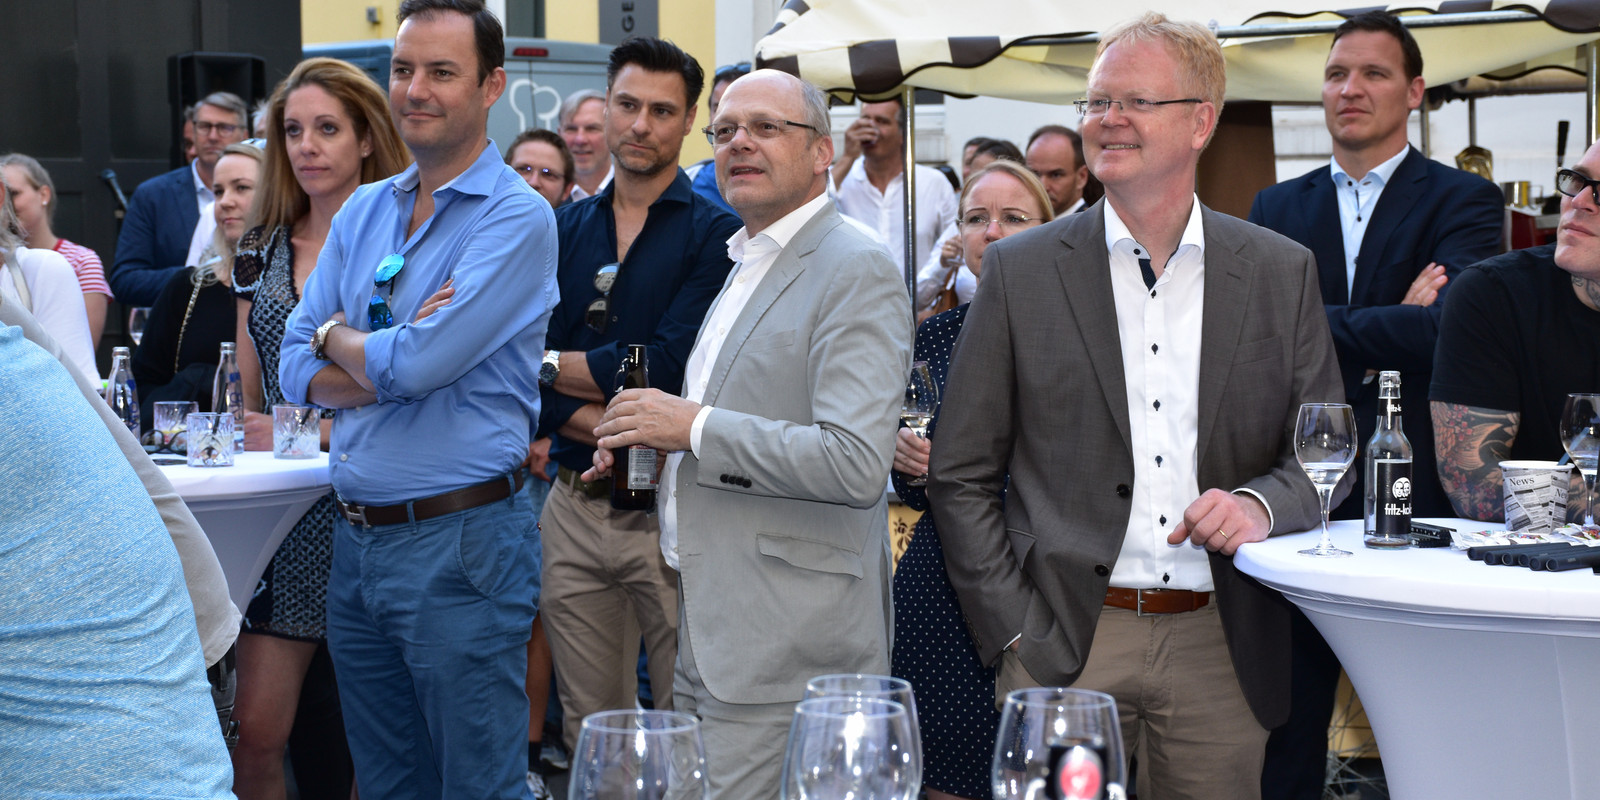 190627_Reopening_Party_Hannover Bild 5